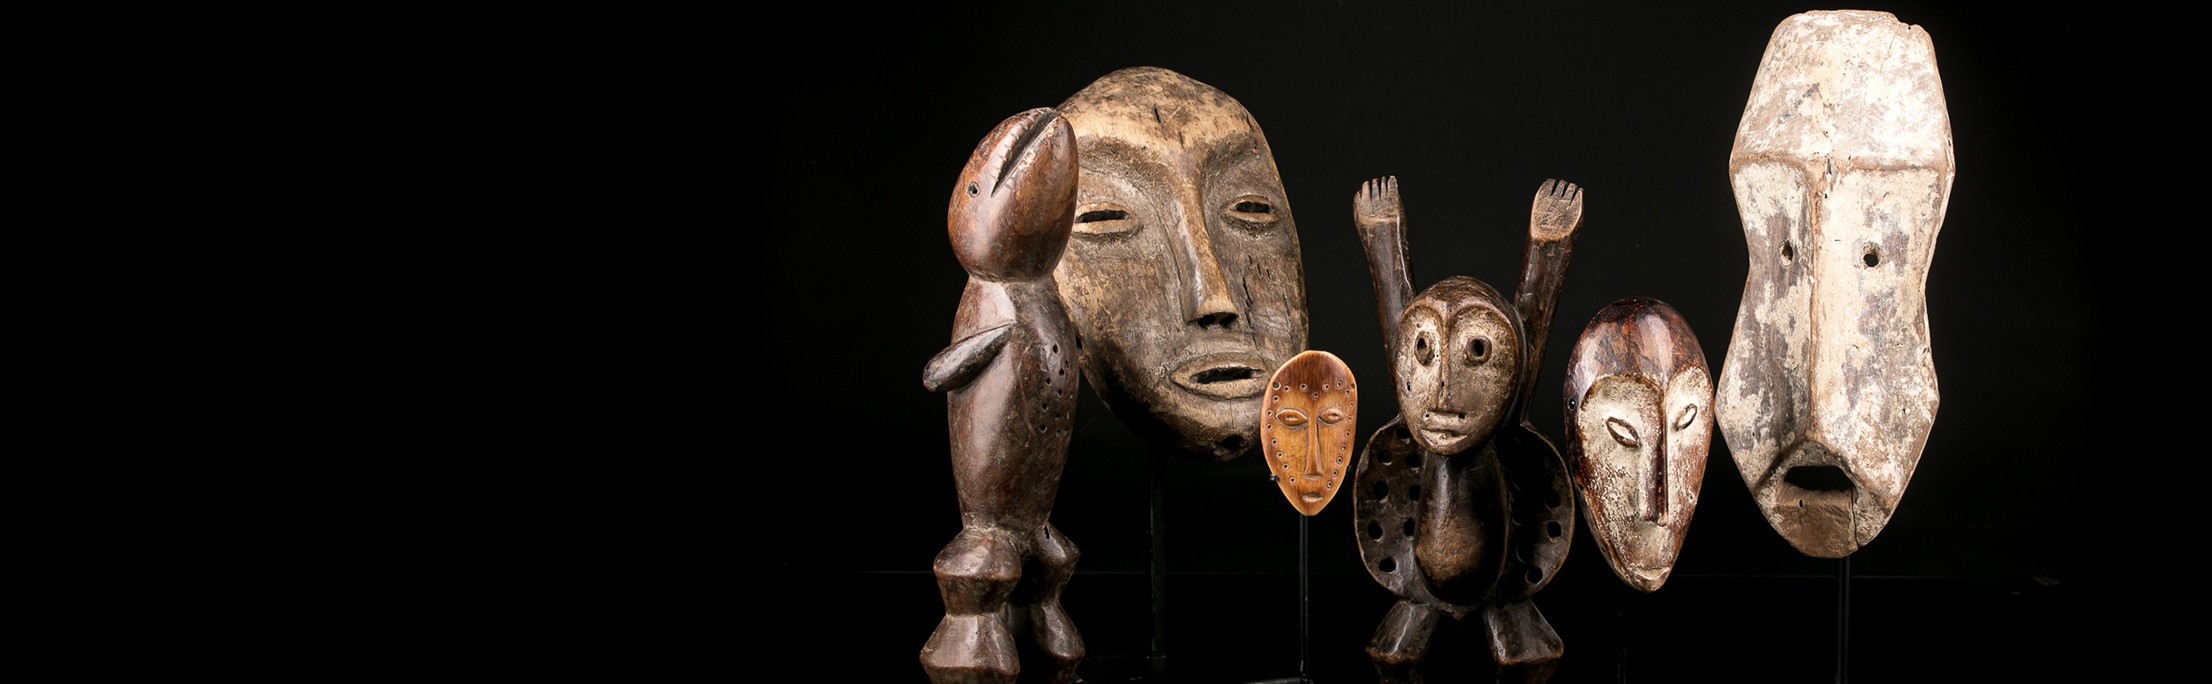 Collection de masques africains et statues africaines Lega pour home staging